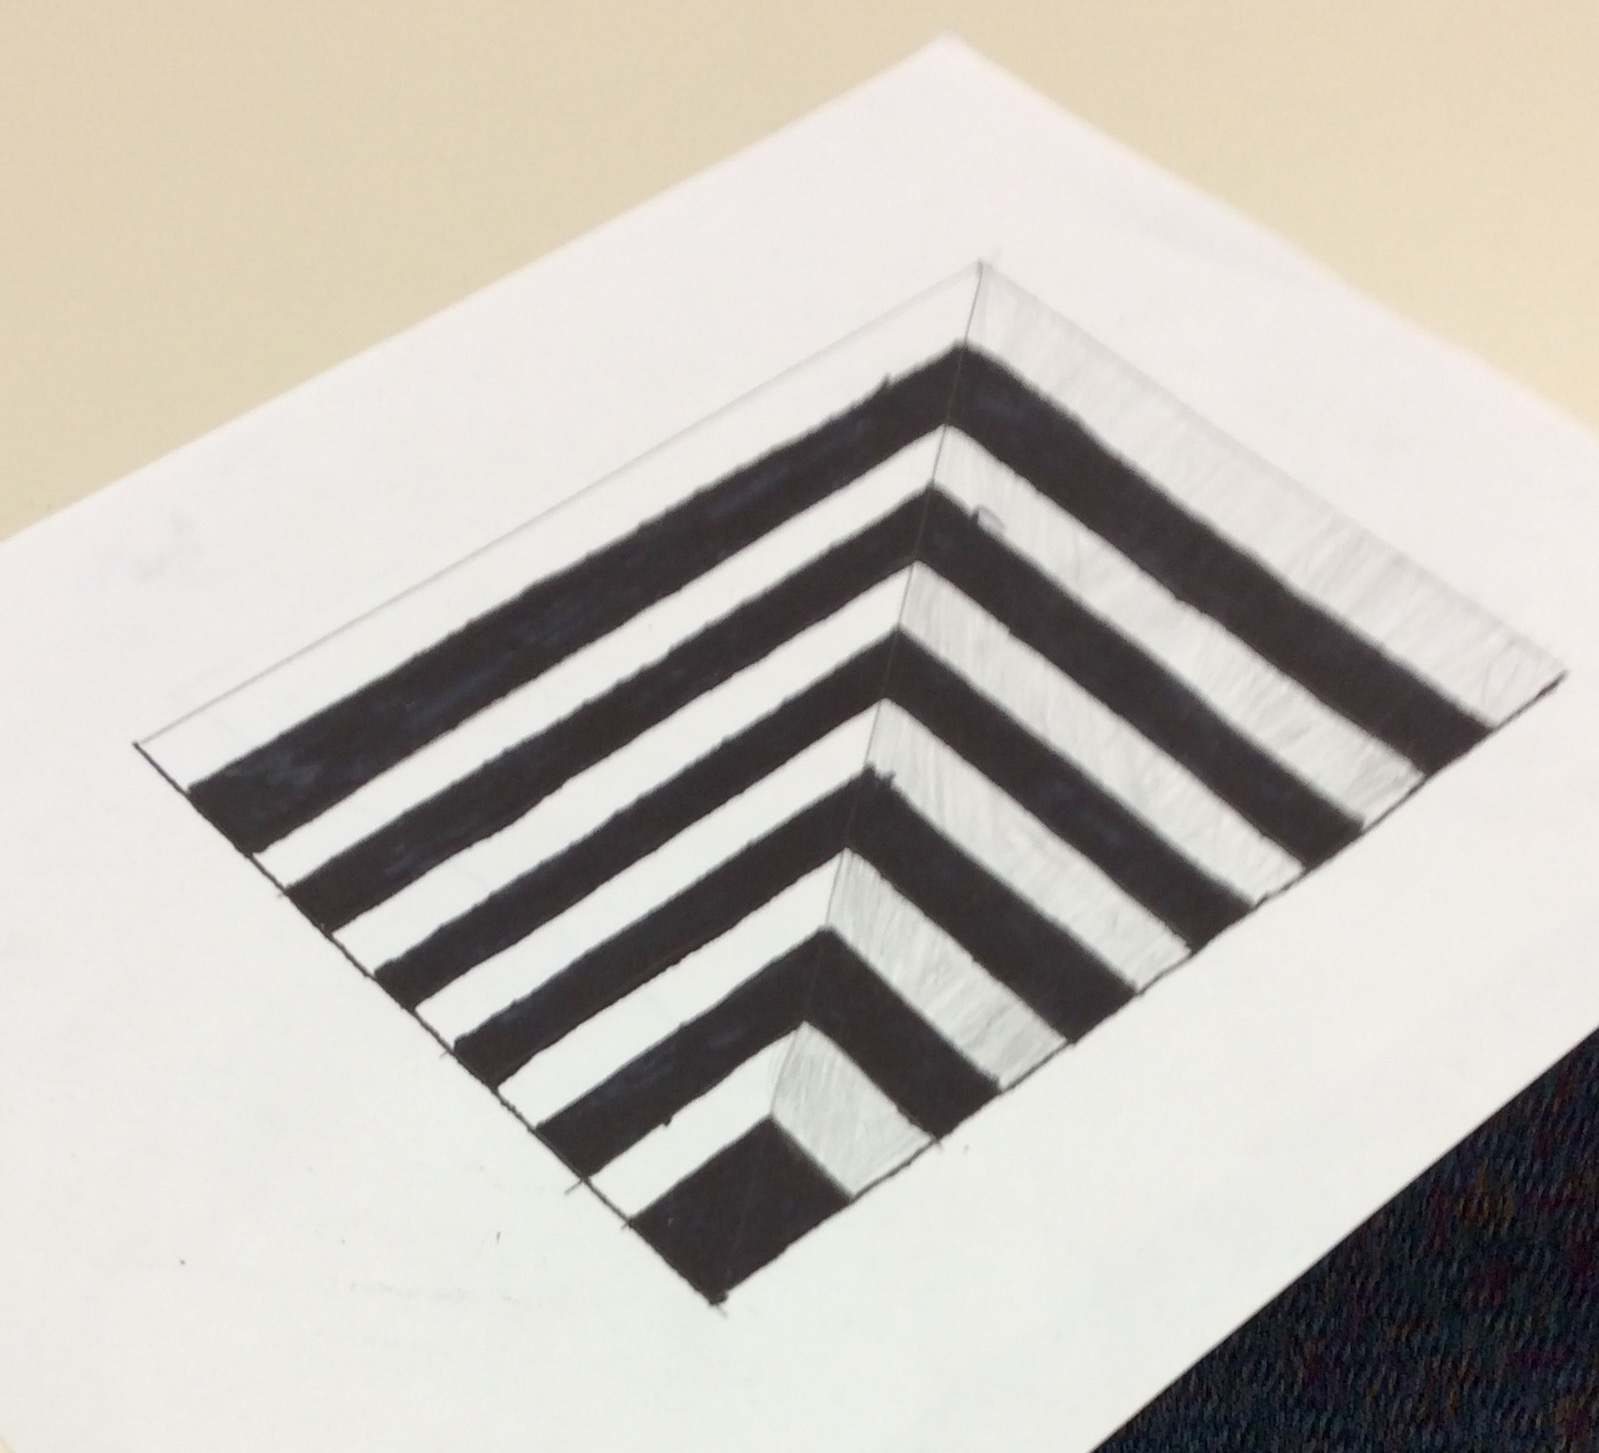 Optical Illusions Drawings Template Business - Riset